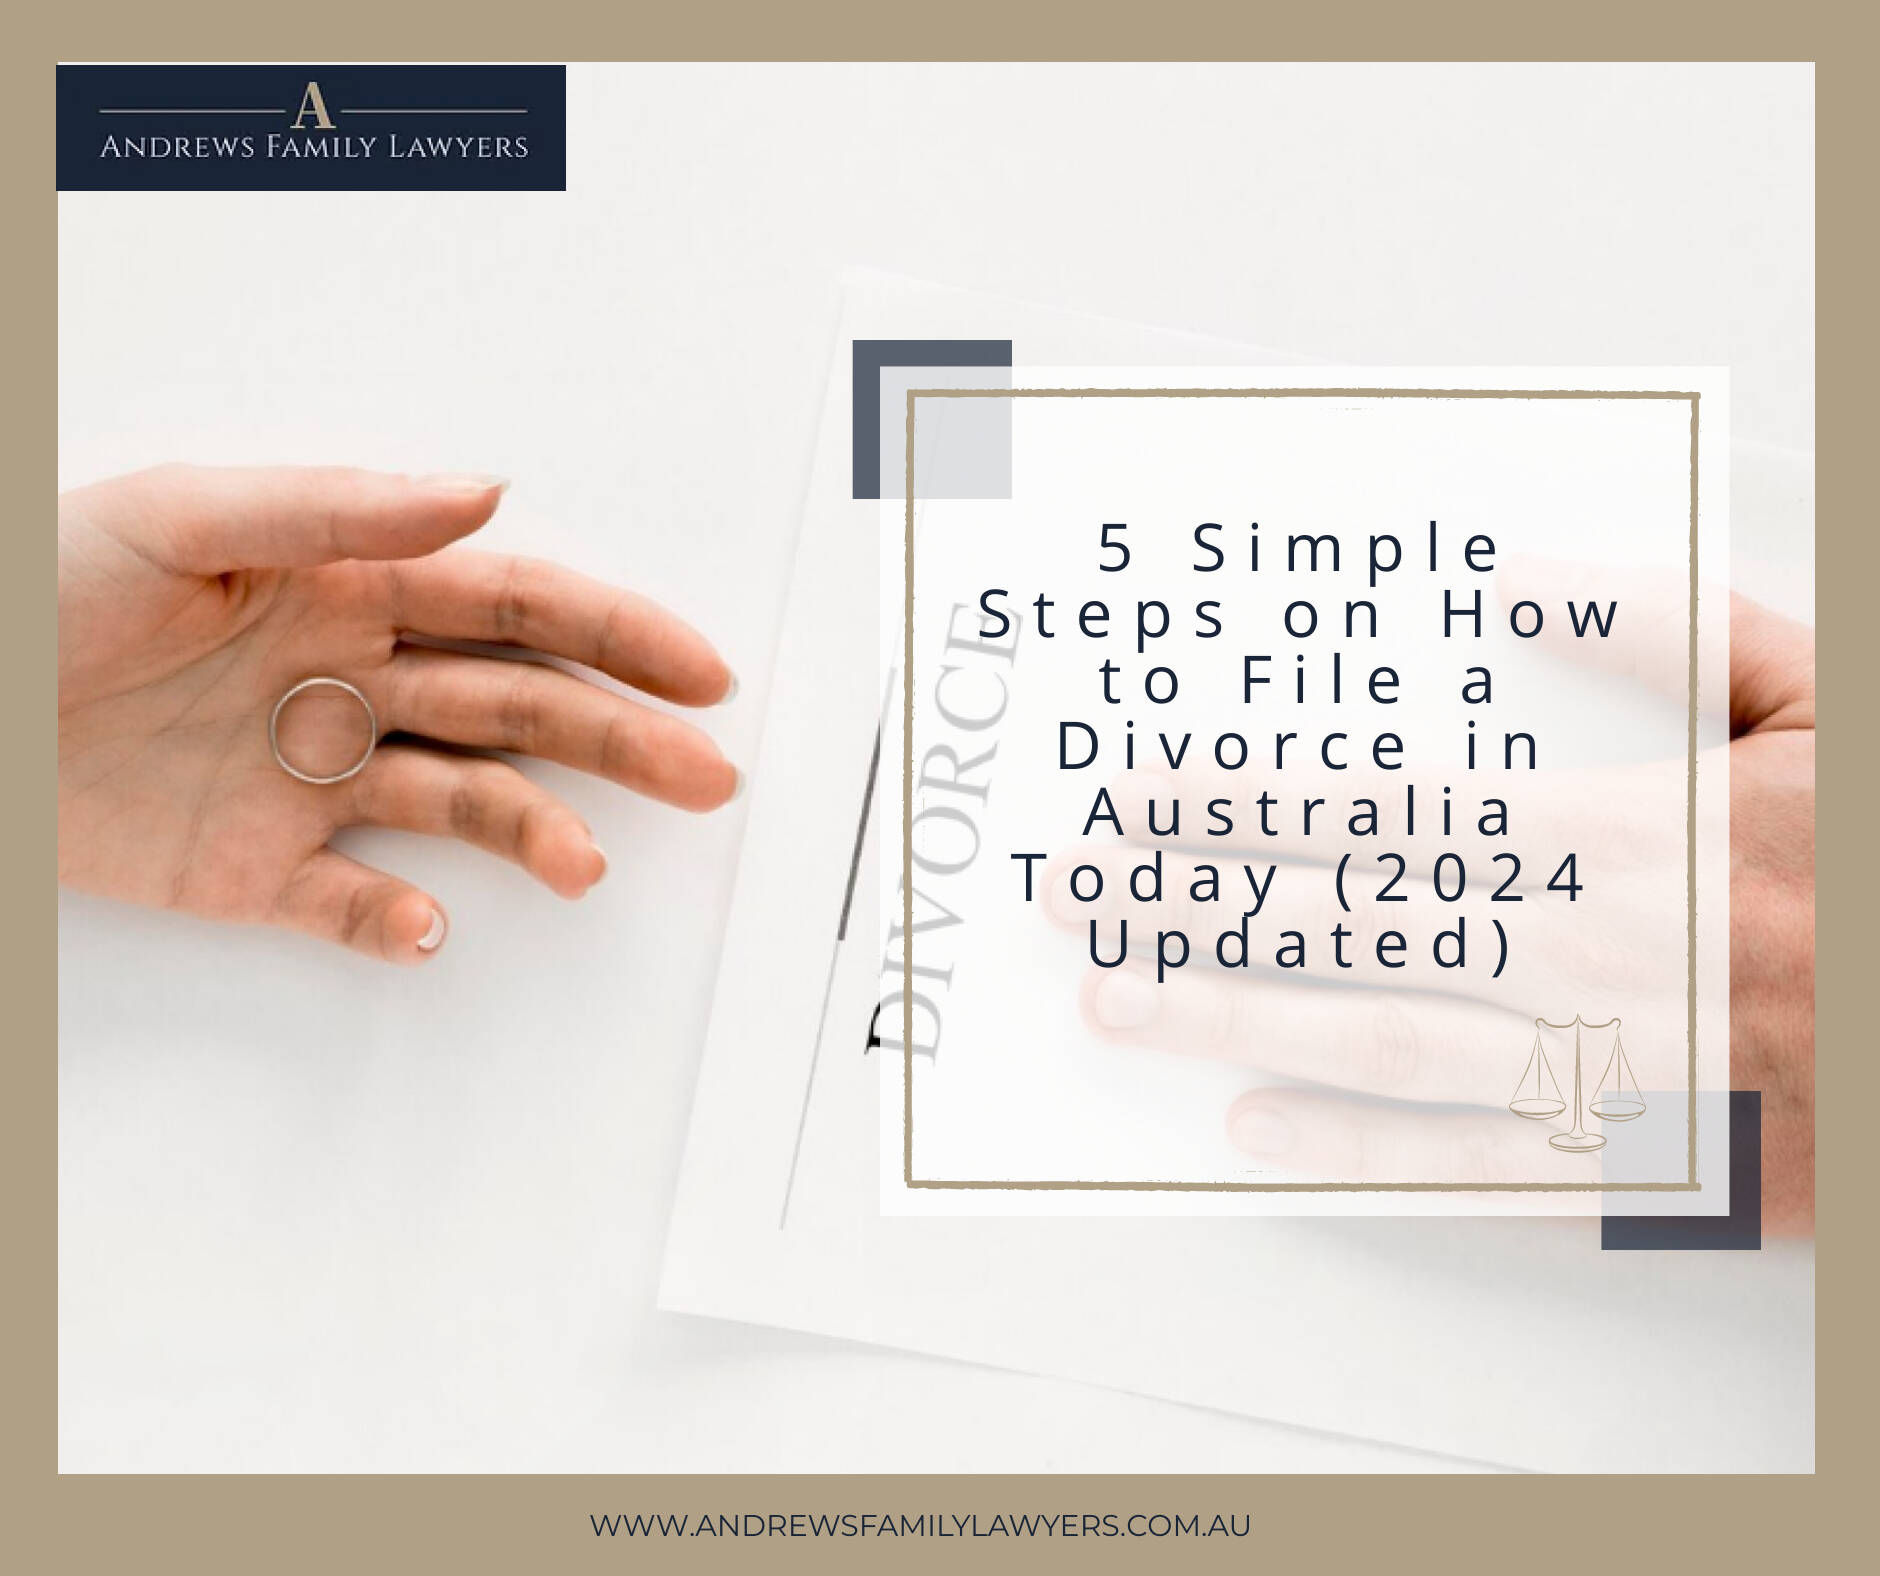 5 Simple Steps on How to File a Divorce in Australia Today (2024 Updated)